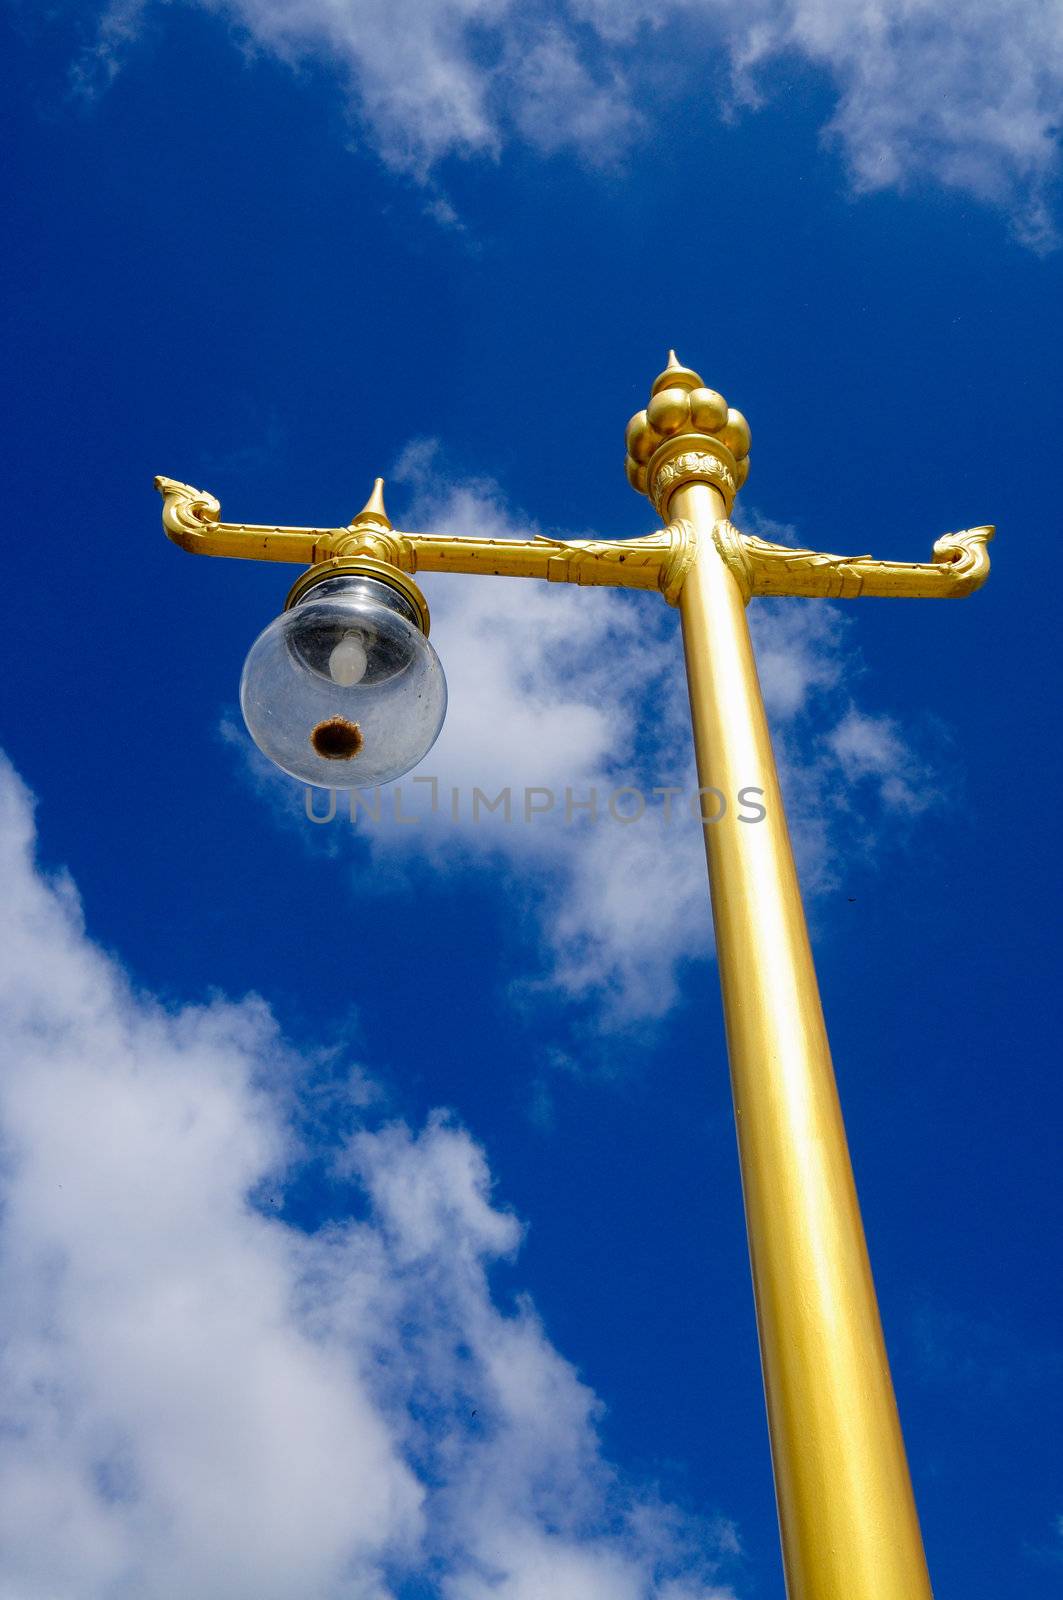 a gold-colored lamp post standing in the blue sky by ekawatchaow